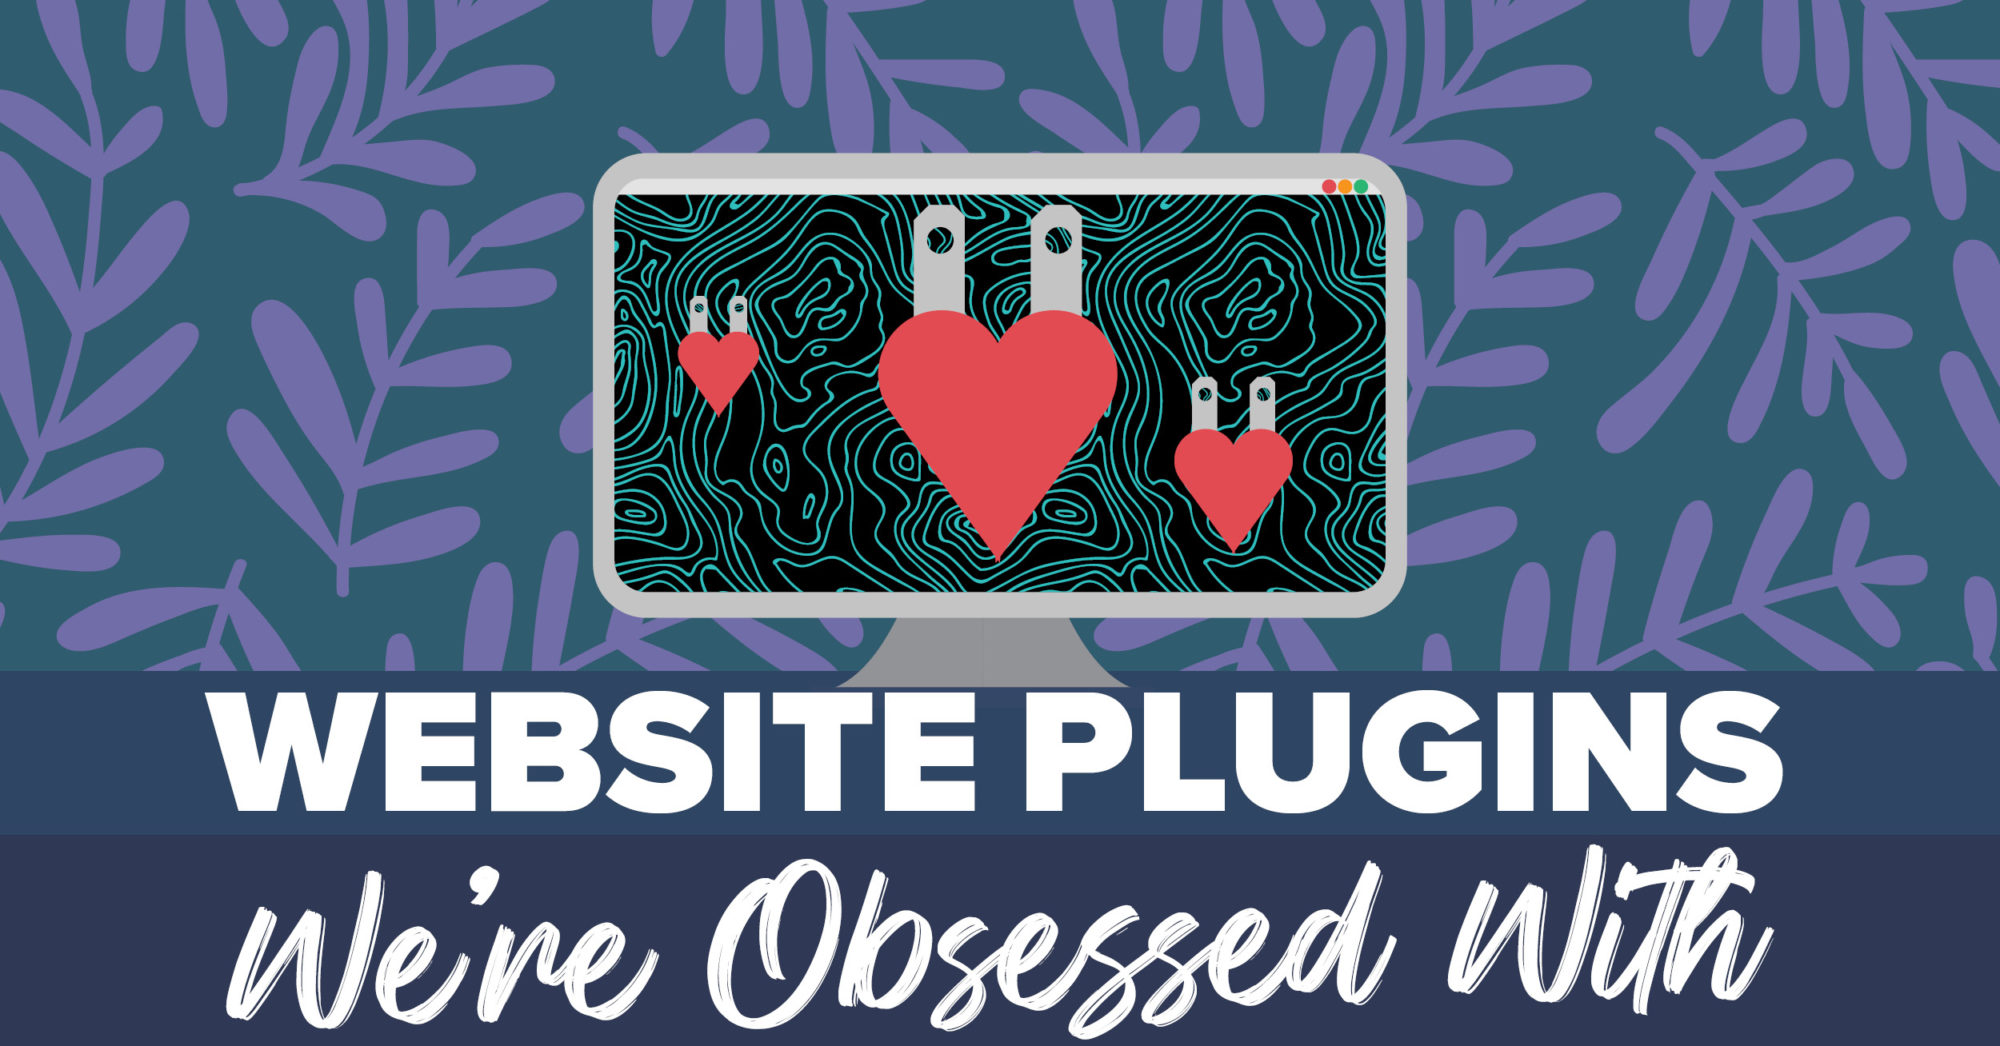 Red hearts with electrical plug-in adapters, hovering on a web browser screen, with the text "Website Plugins We're Obsessed With."